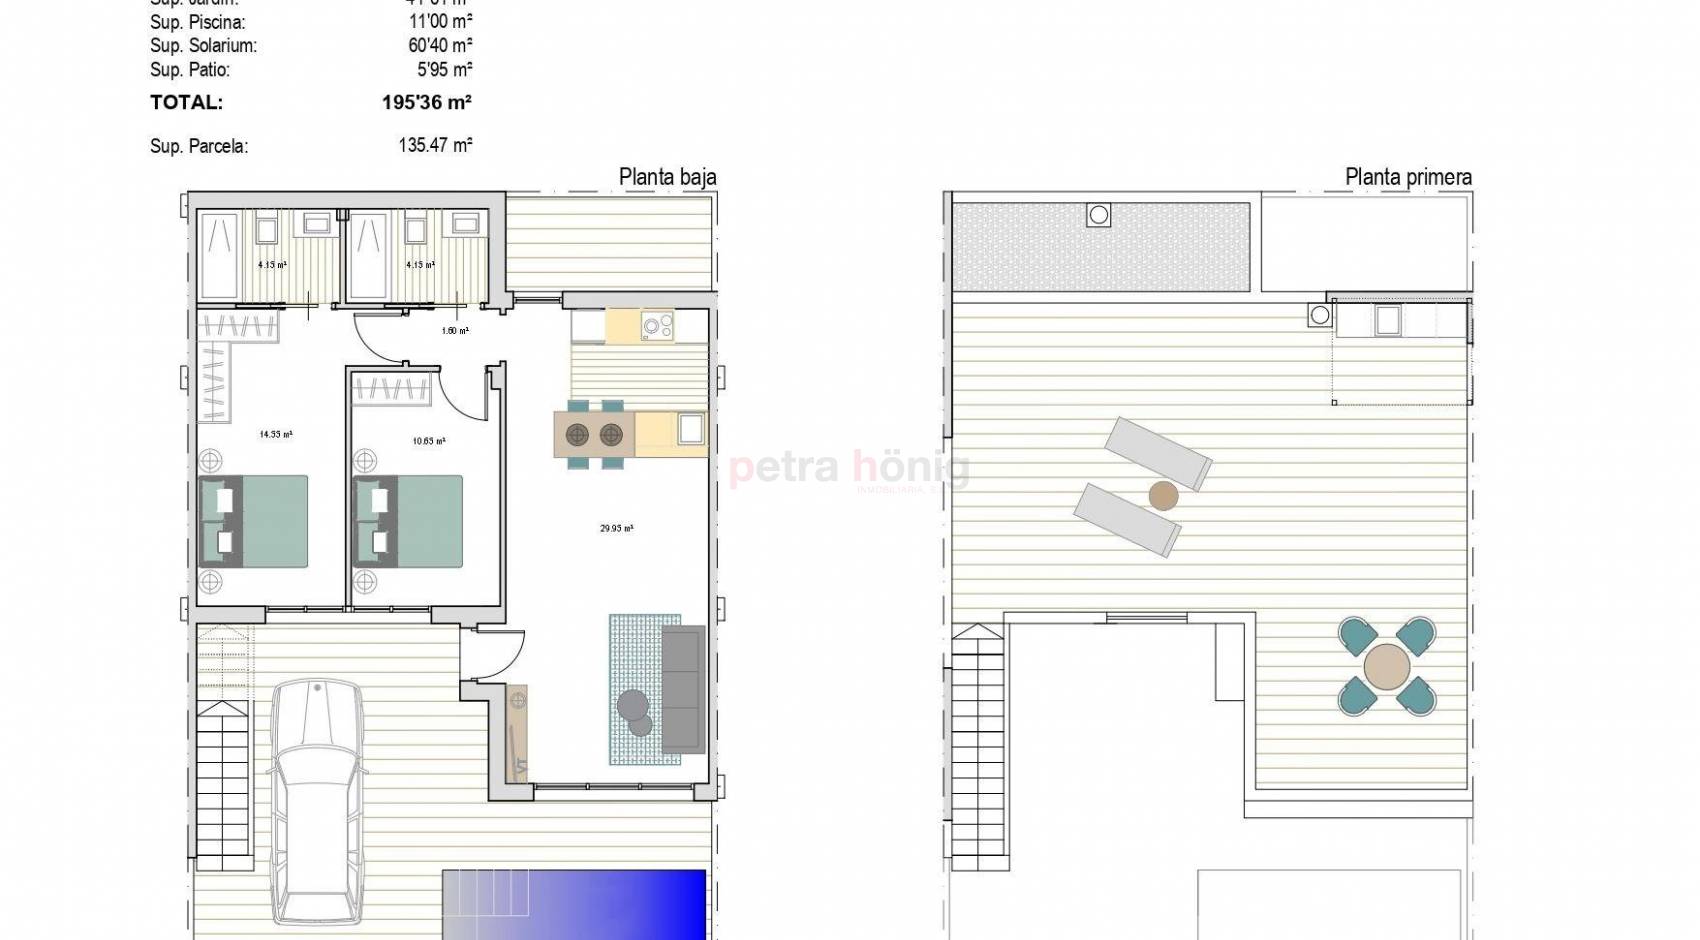 mpya - Rekkehus - Other areas - Torre-pacheco